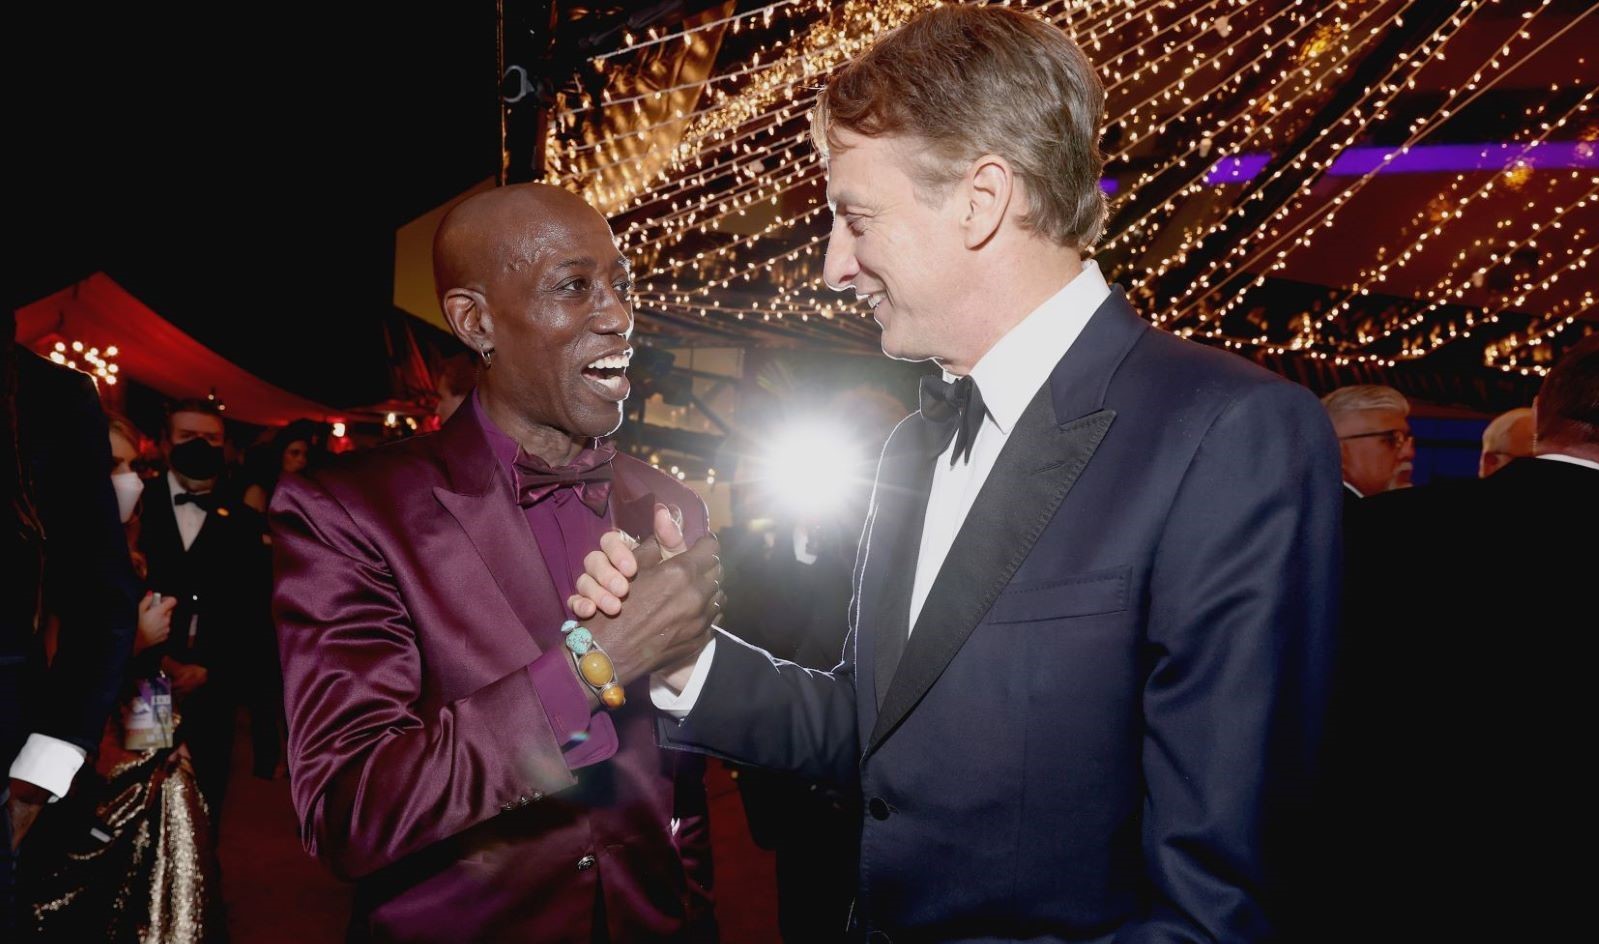 Wesley Snipes and Tony Hawk attend the Governors Ball during the 94th Annual Academy Awards